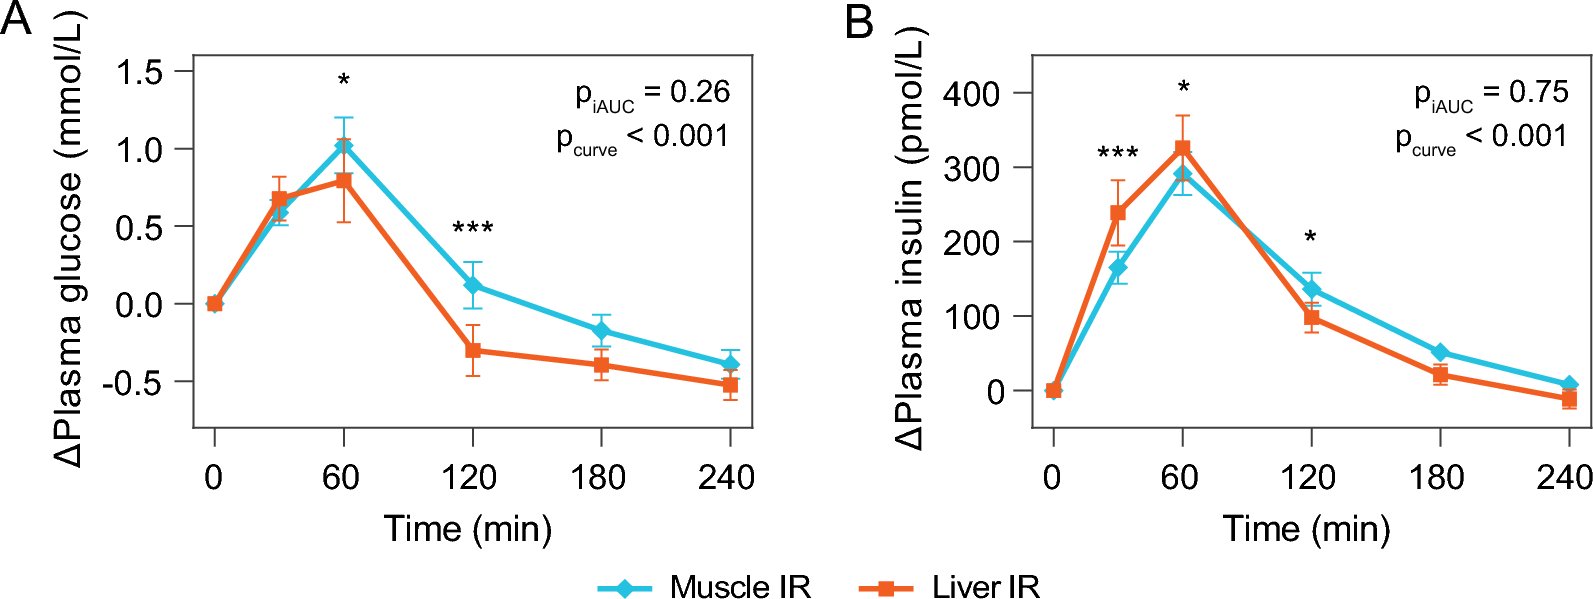 Hepatic insulin resistance and muscle insulin resistance are characterized by distinct postprandial plasma metabolite profiles: a cross-sectional study